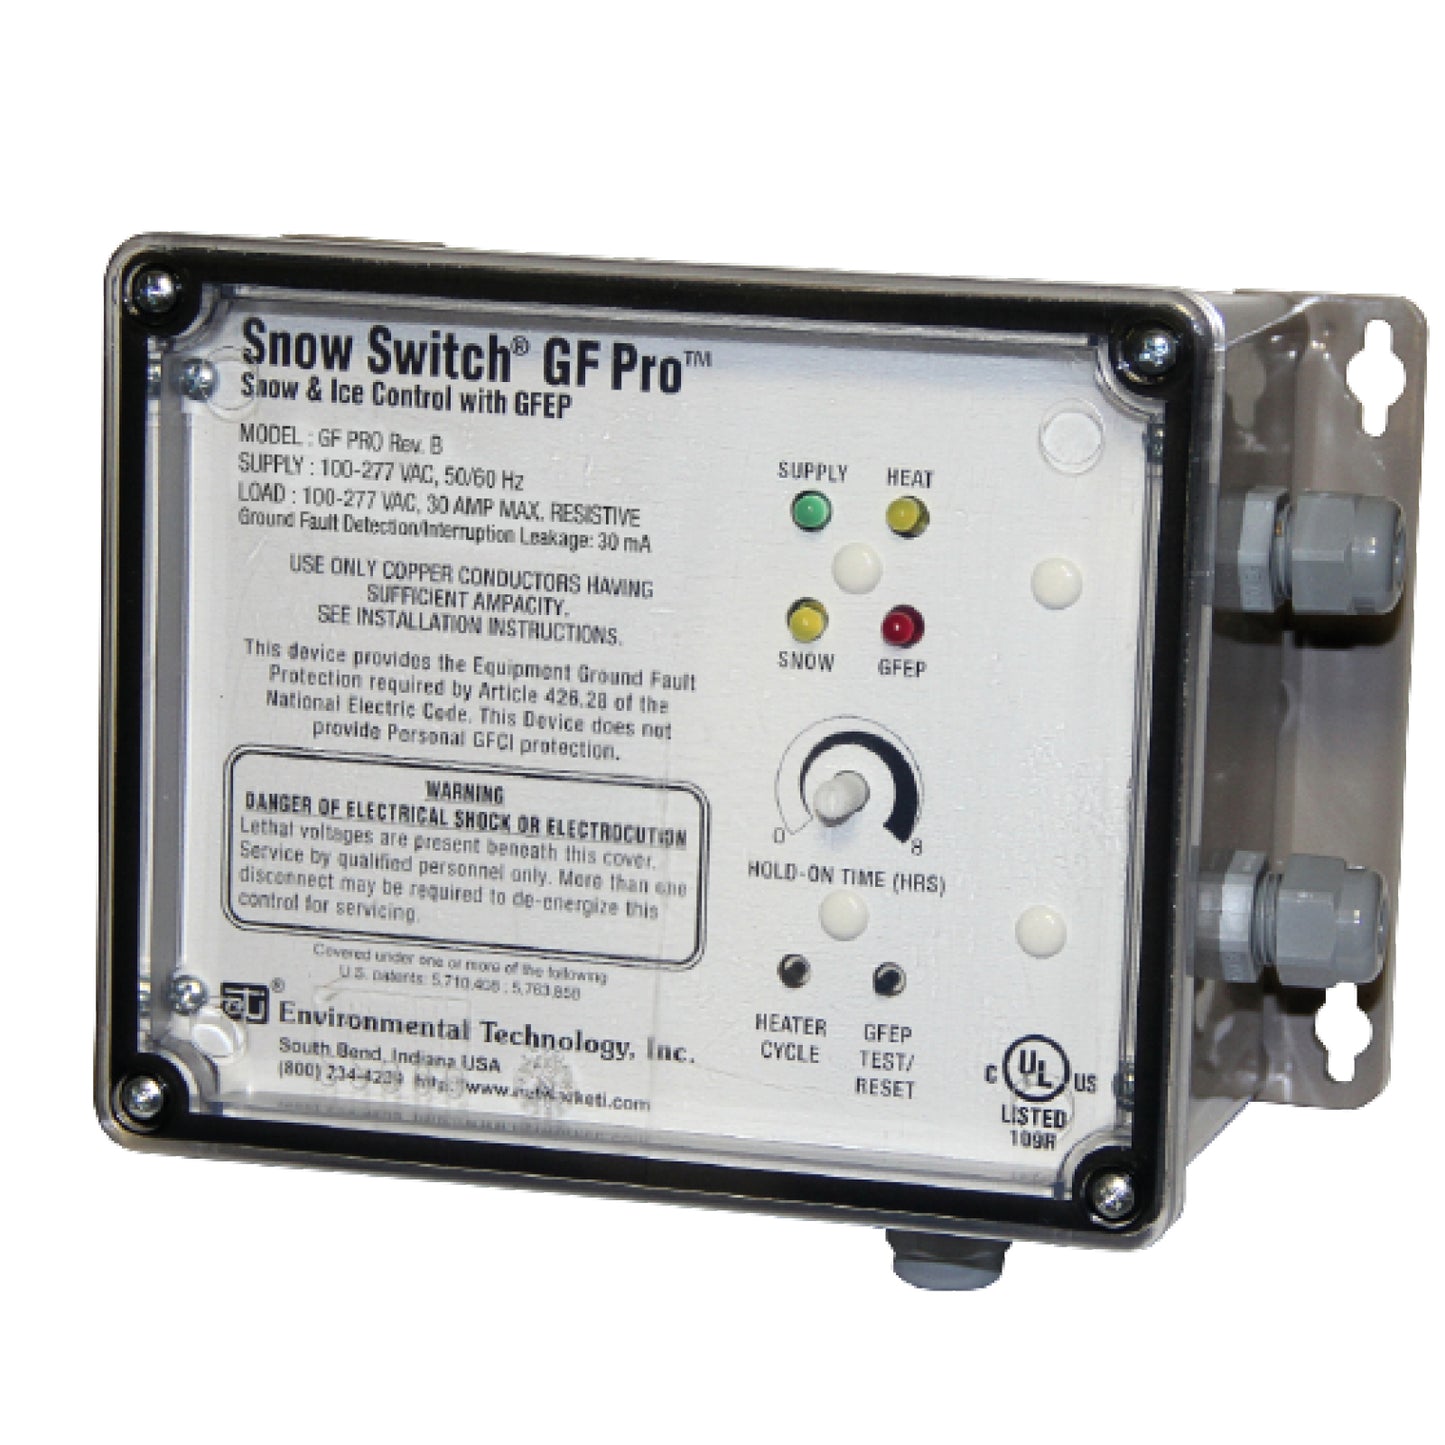 GF PRO (23917) Snow Switch. Automatic Snow & Ice Melting System Control with Integral Ground Fault Equipment Protection, 100-277V AC